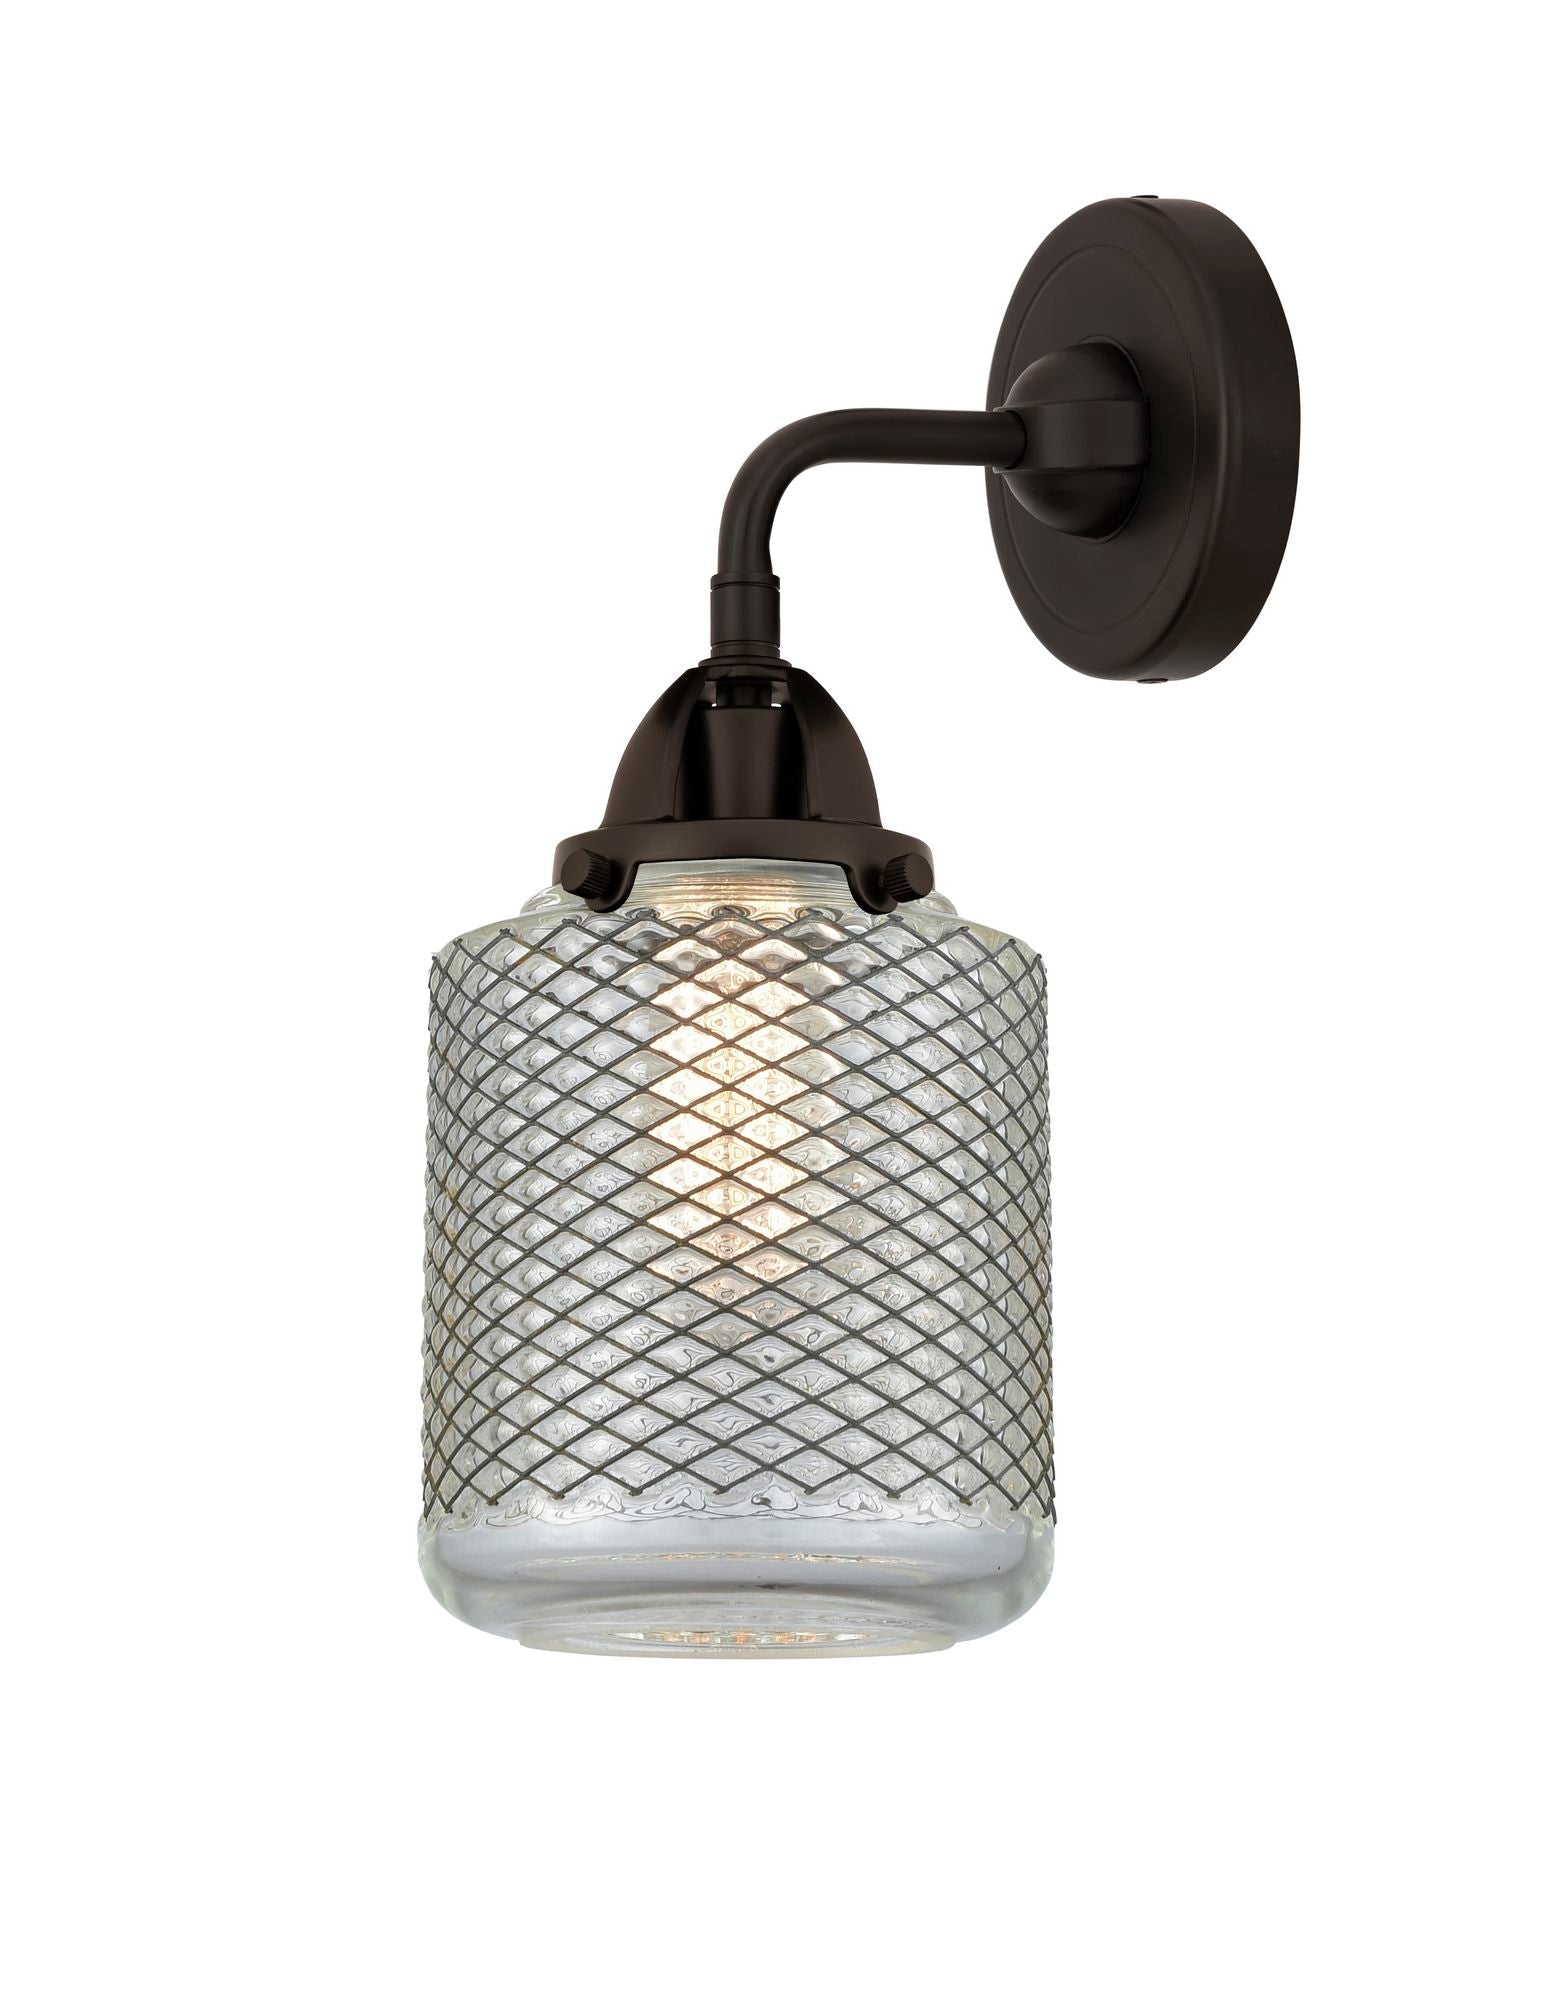 288-1W-OB-G262 1-Light 6" Oil Rubbed Bronze Sconce - Vintage Wire Mesh Stanton Glass - LED Bulb - Dimmensions: 6 x 7.25 x 12.125 - Glass Up or Down: Yes